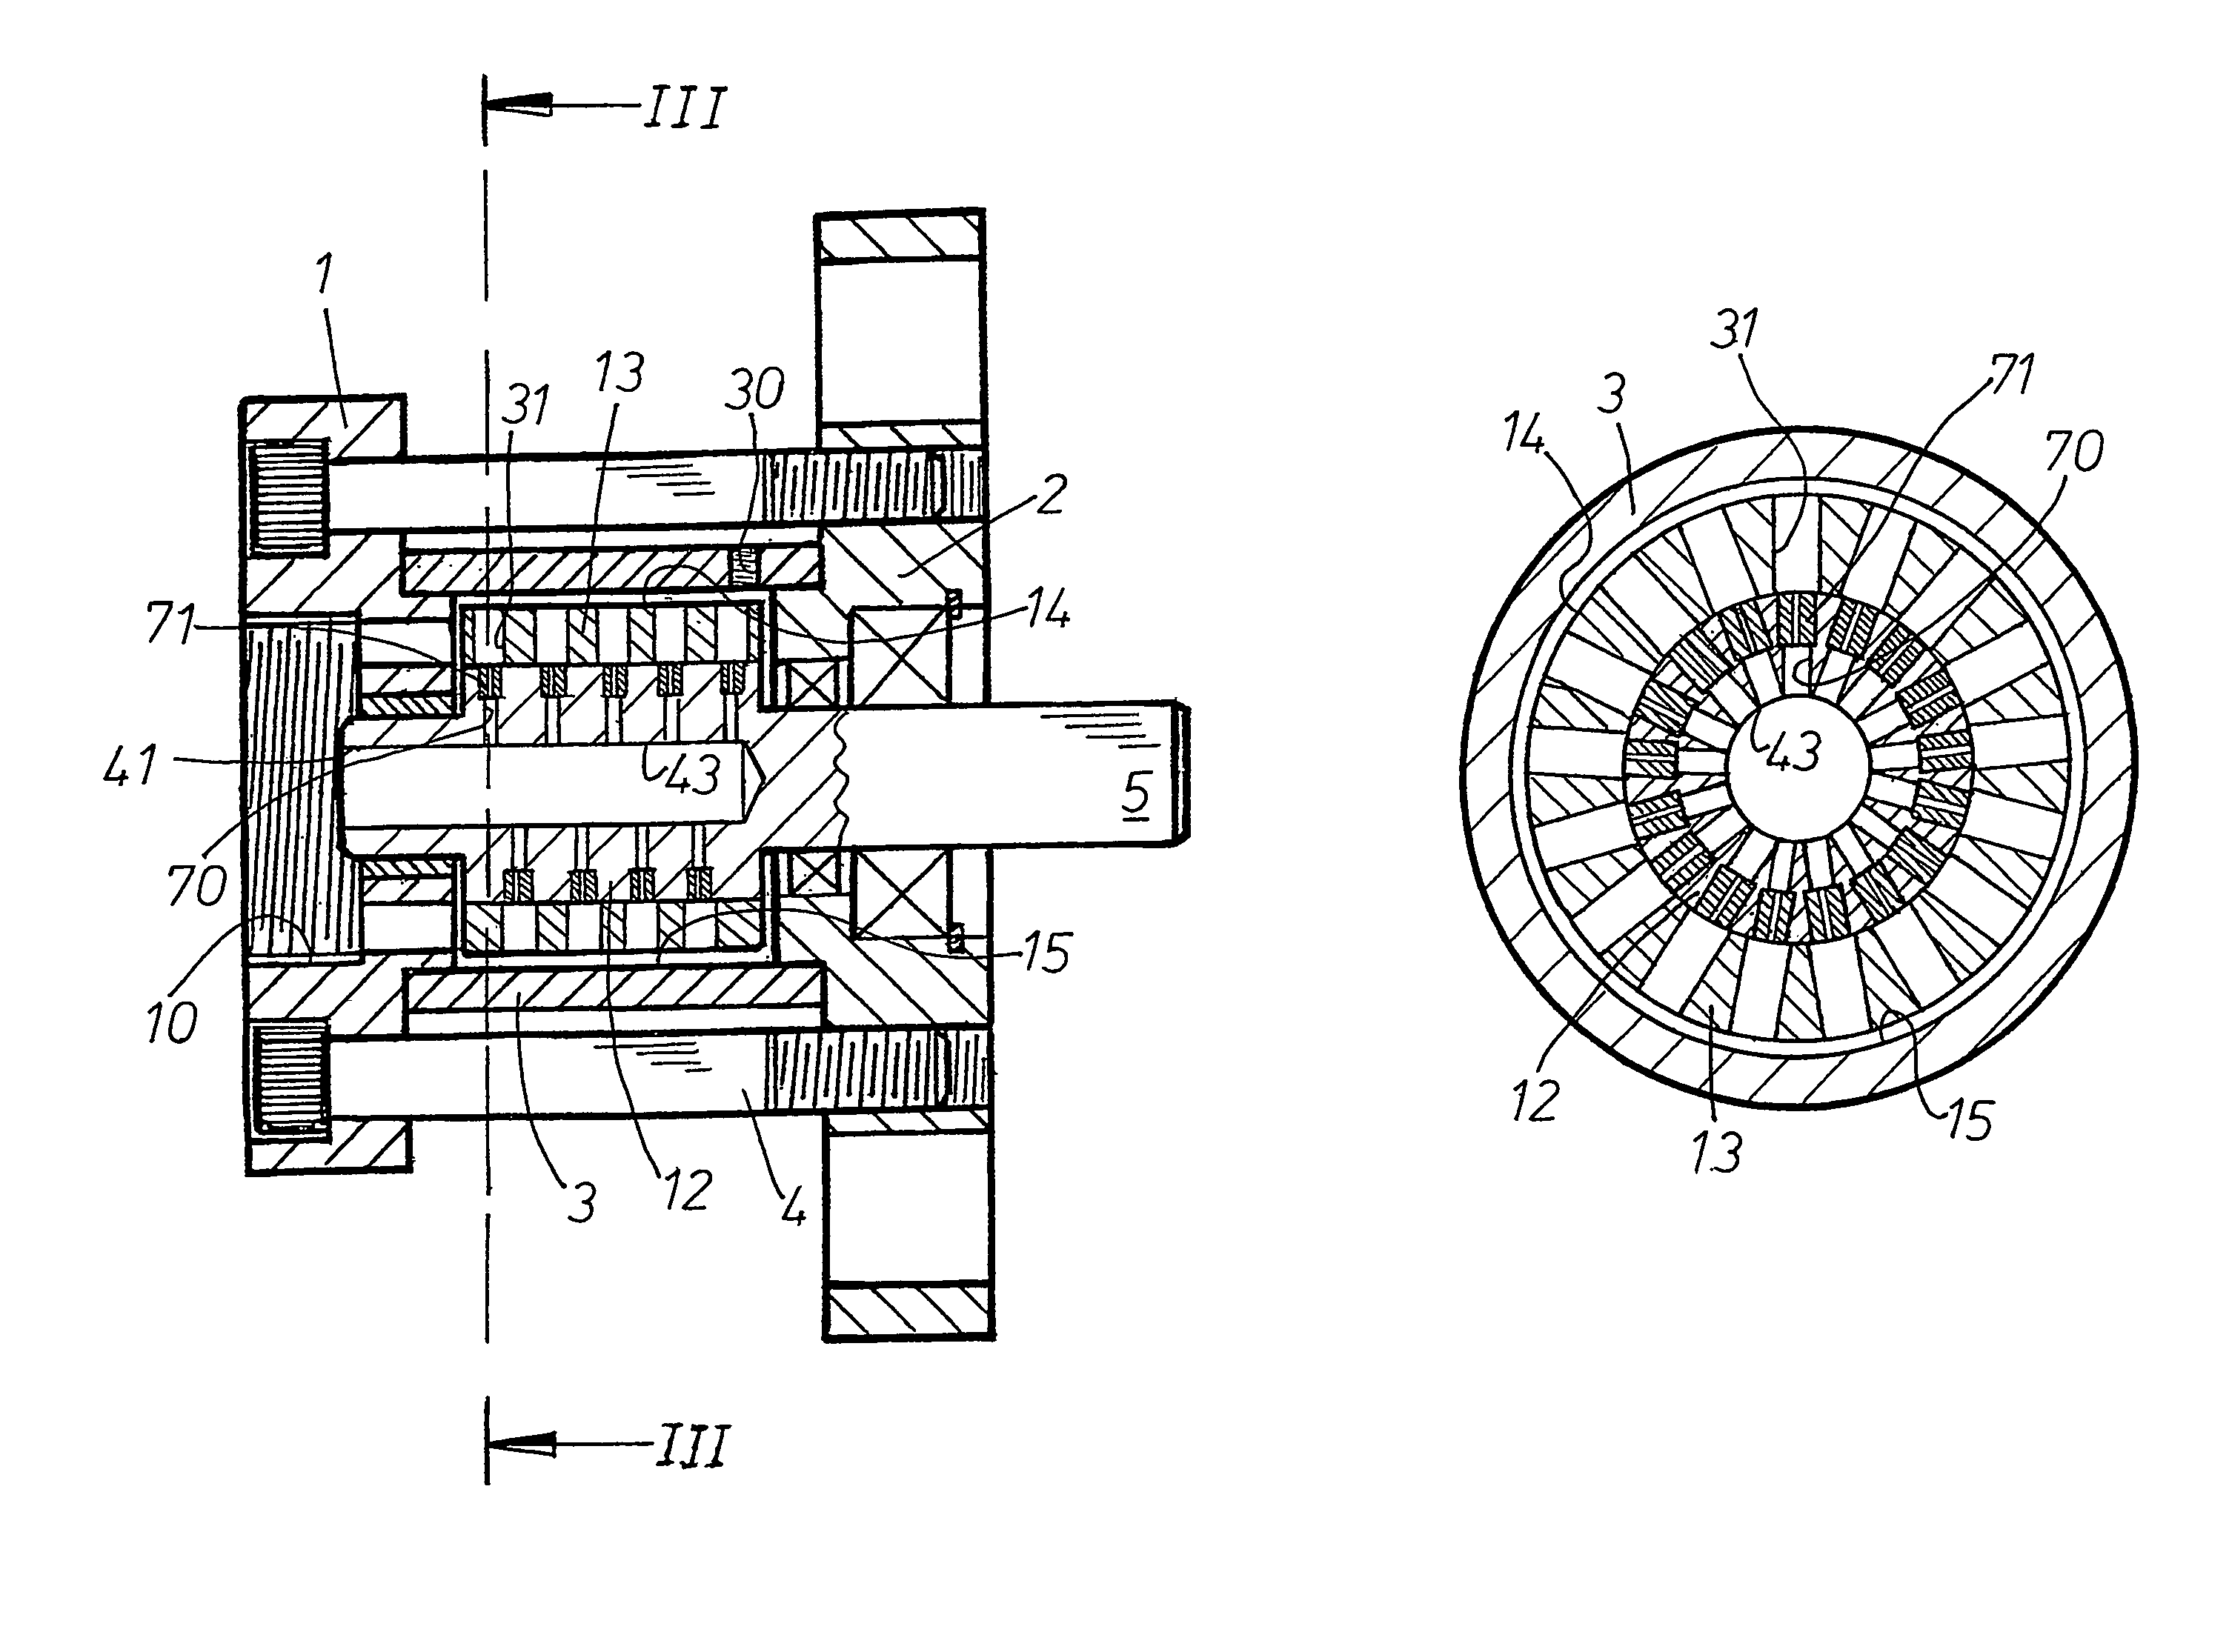 Apparatus and method for heating fluids